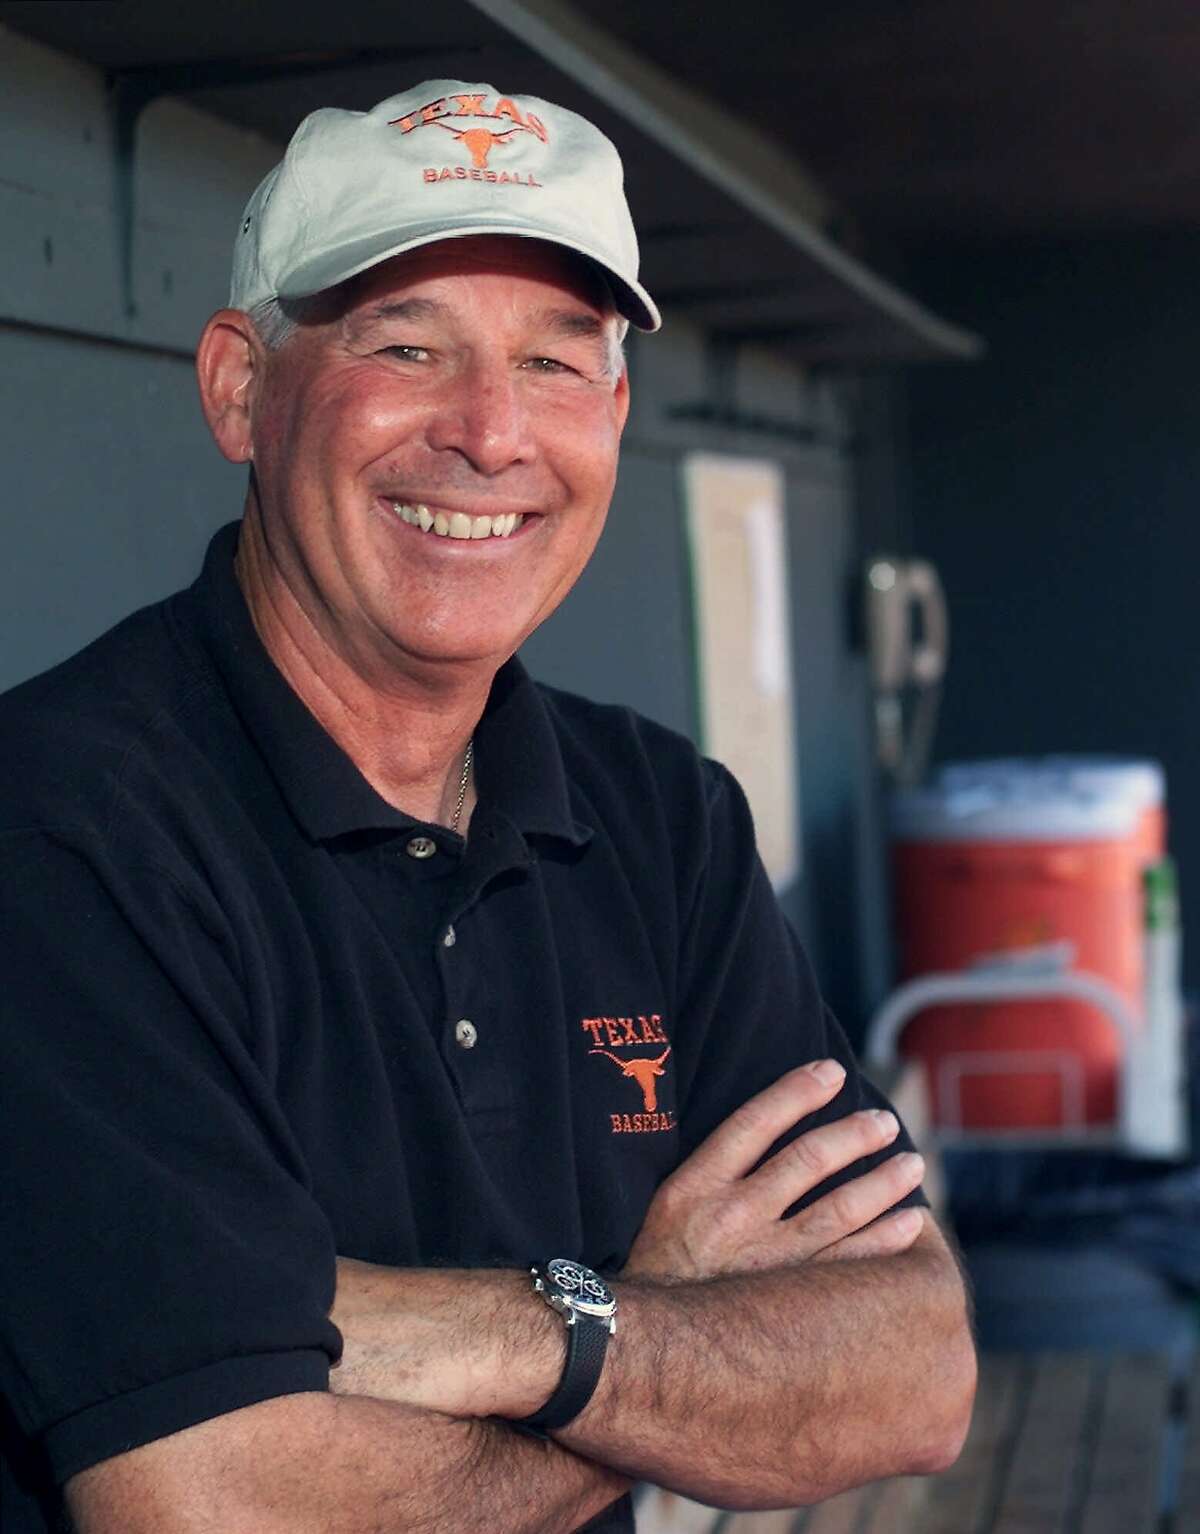 University of Texas head baseball coach Augie Garrido is shown in the team's home dugout on Wednesday, March 29, 2000, in Austin, Texas. Garrido is in his fourth season at Texas. (AP Photo/Harry Cabluck)